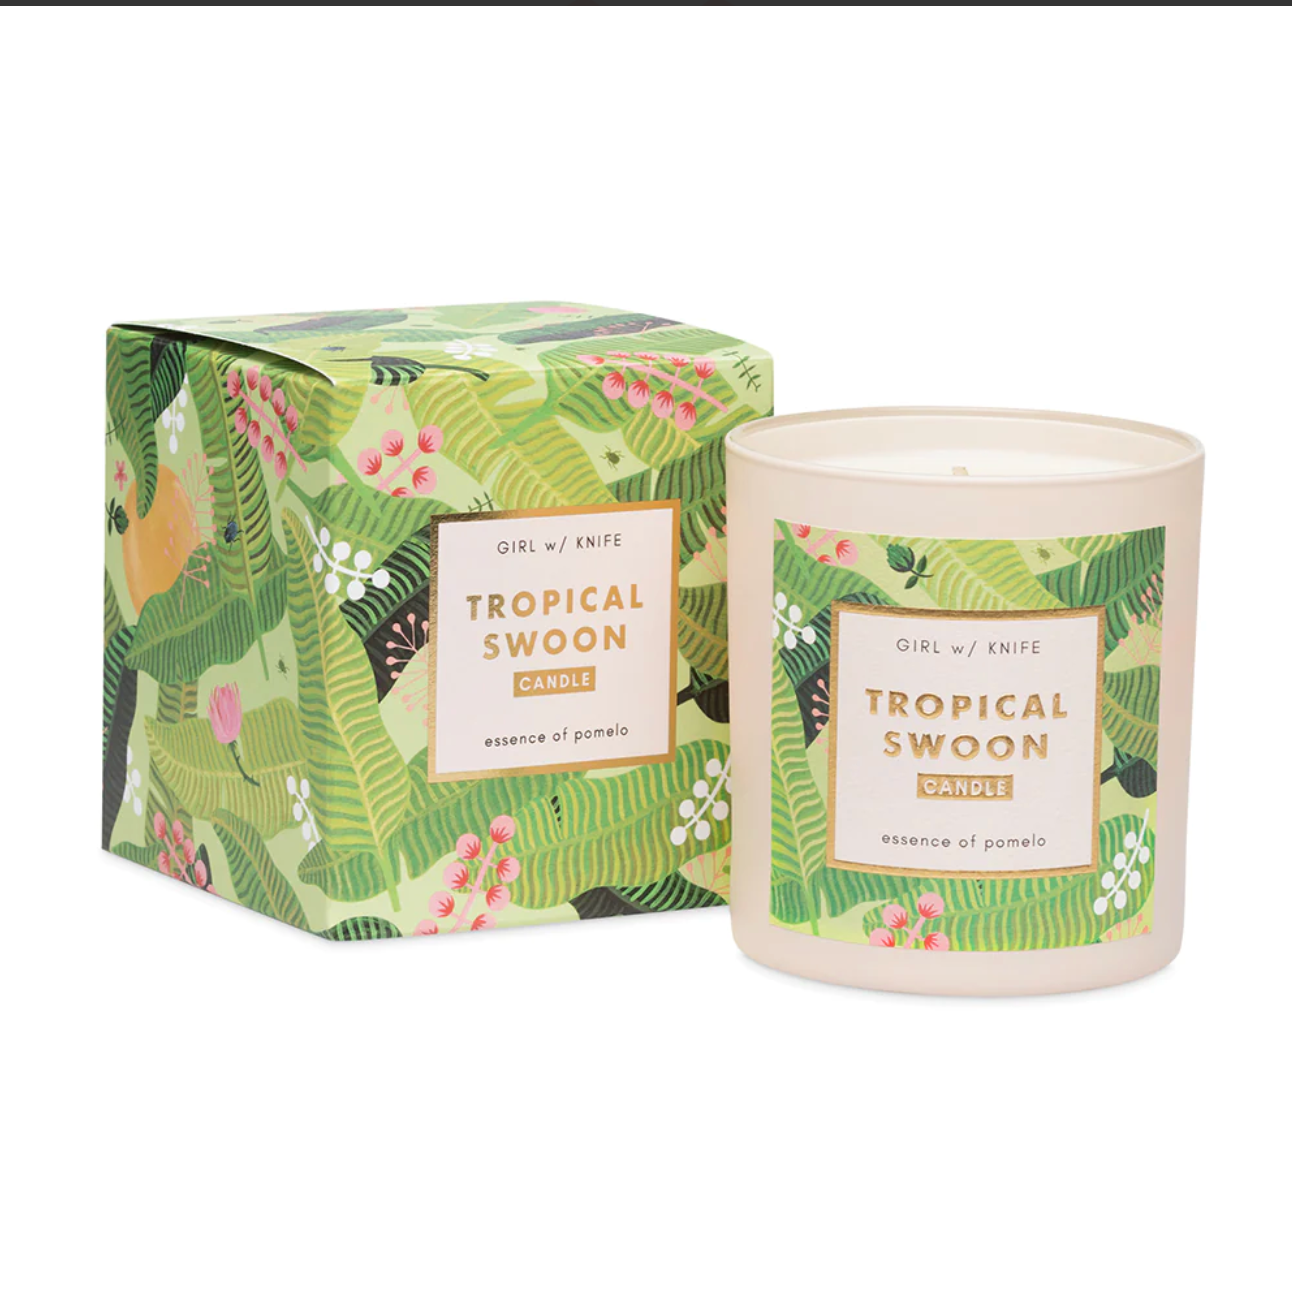 TROPICAL SWOON CANDLE - ESSENCE OF POMELO